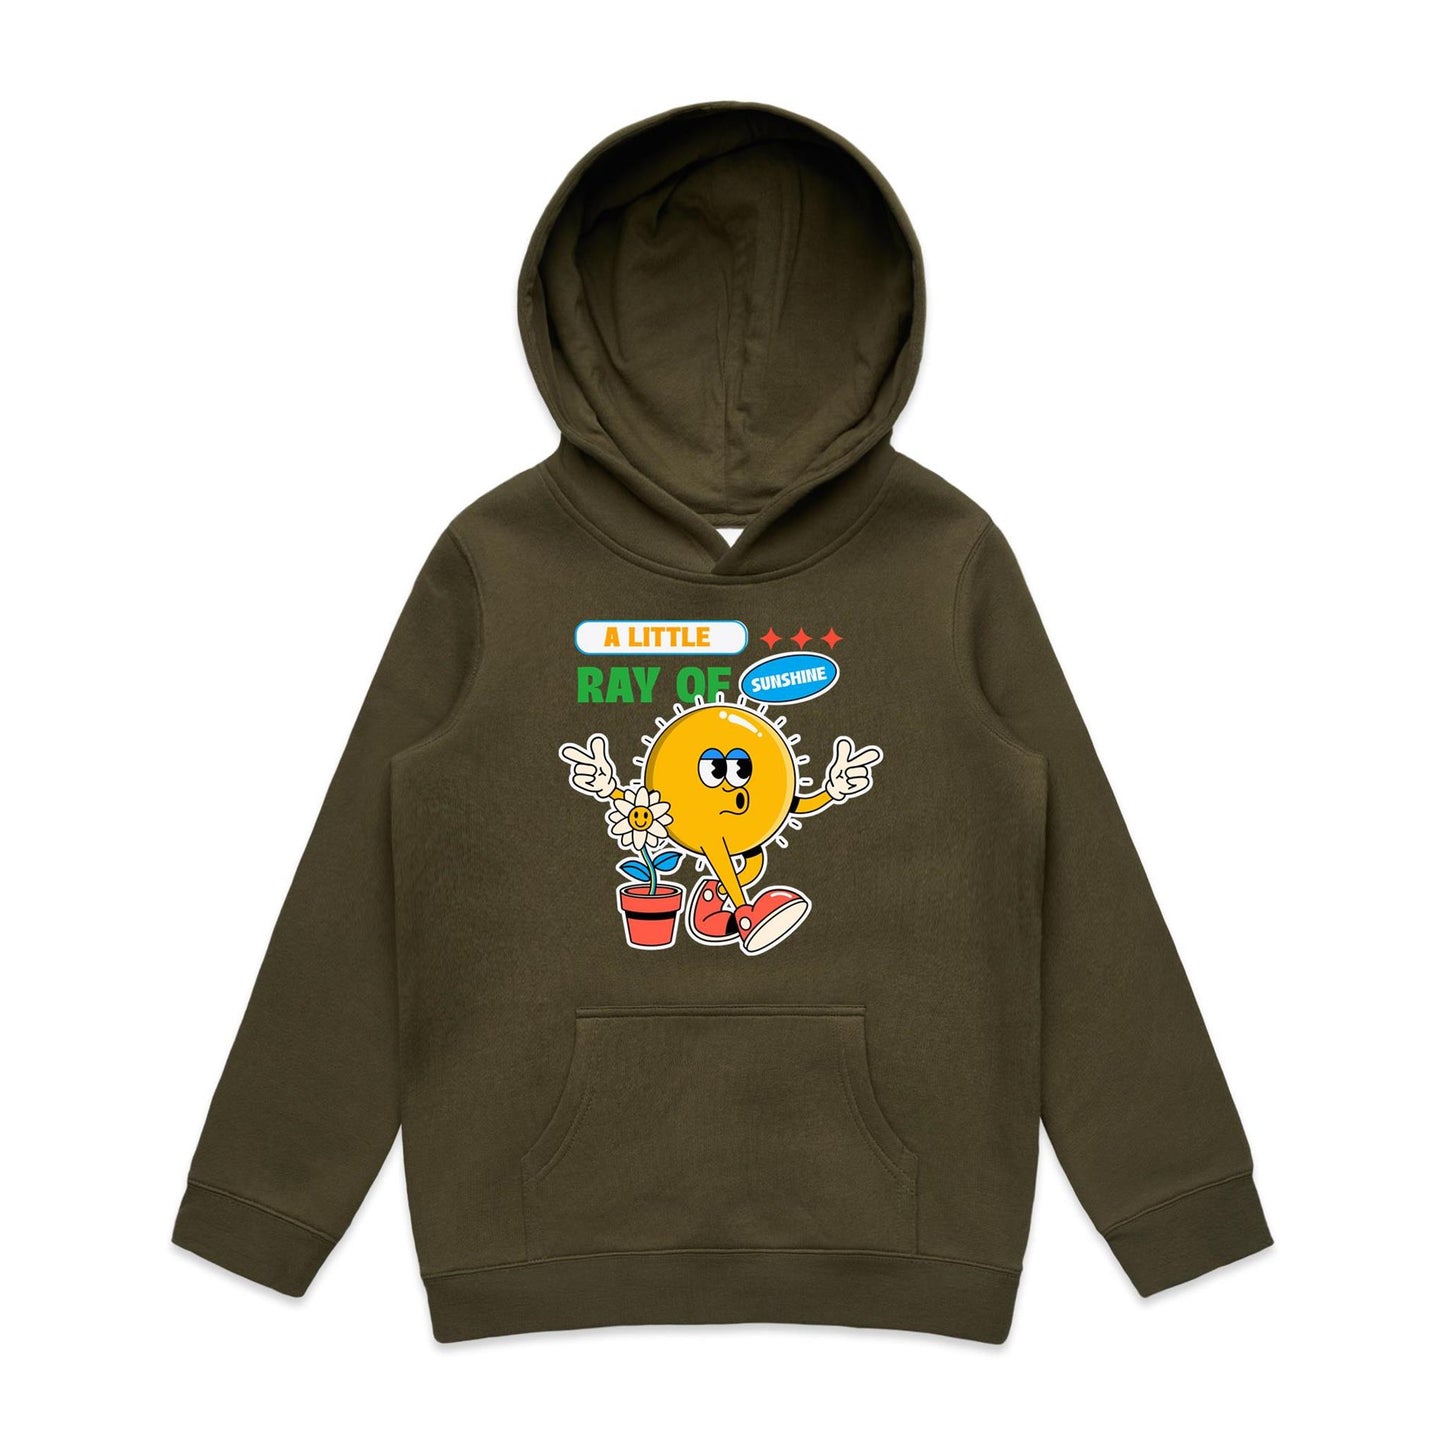 A Little Ray Of Sunshine - Youth Supply Hood Army Kids Hoodie Retro Summer